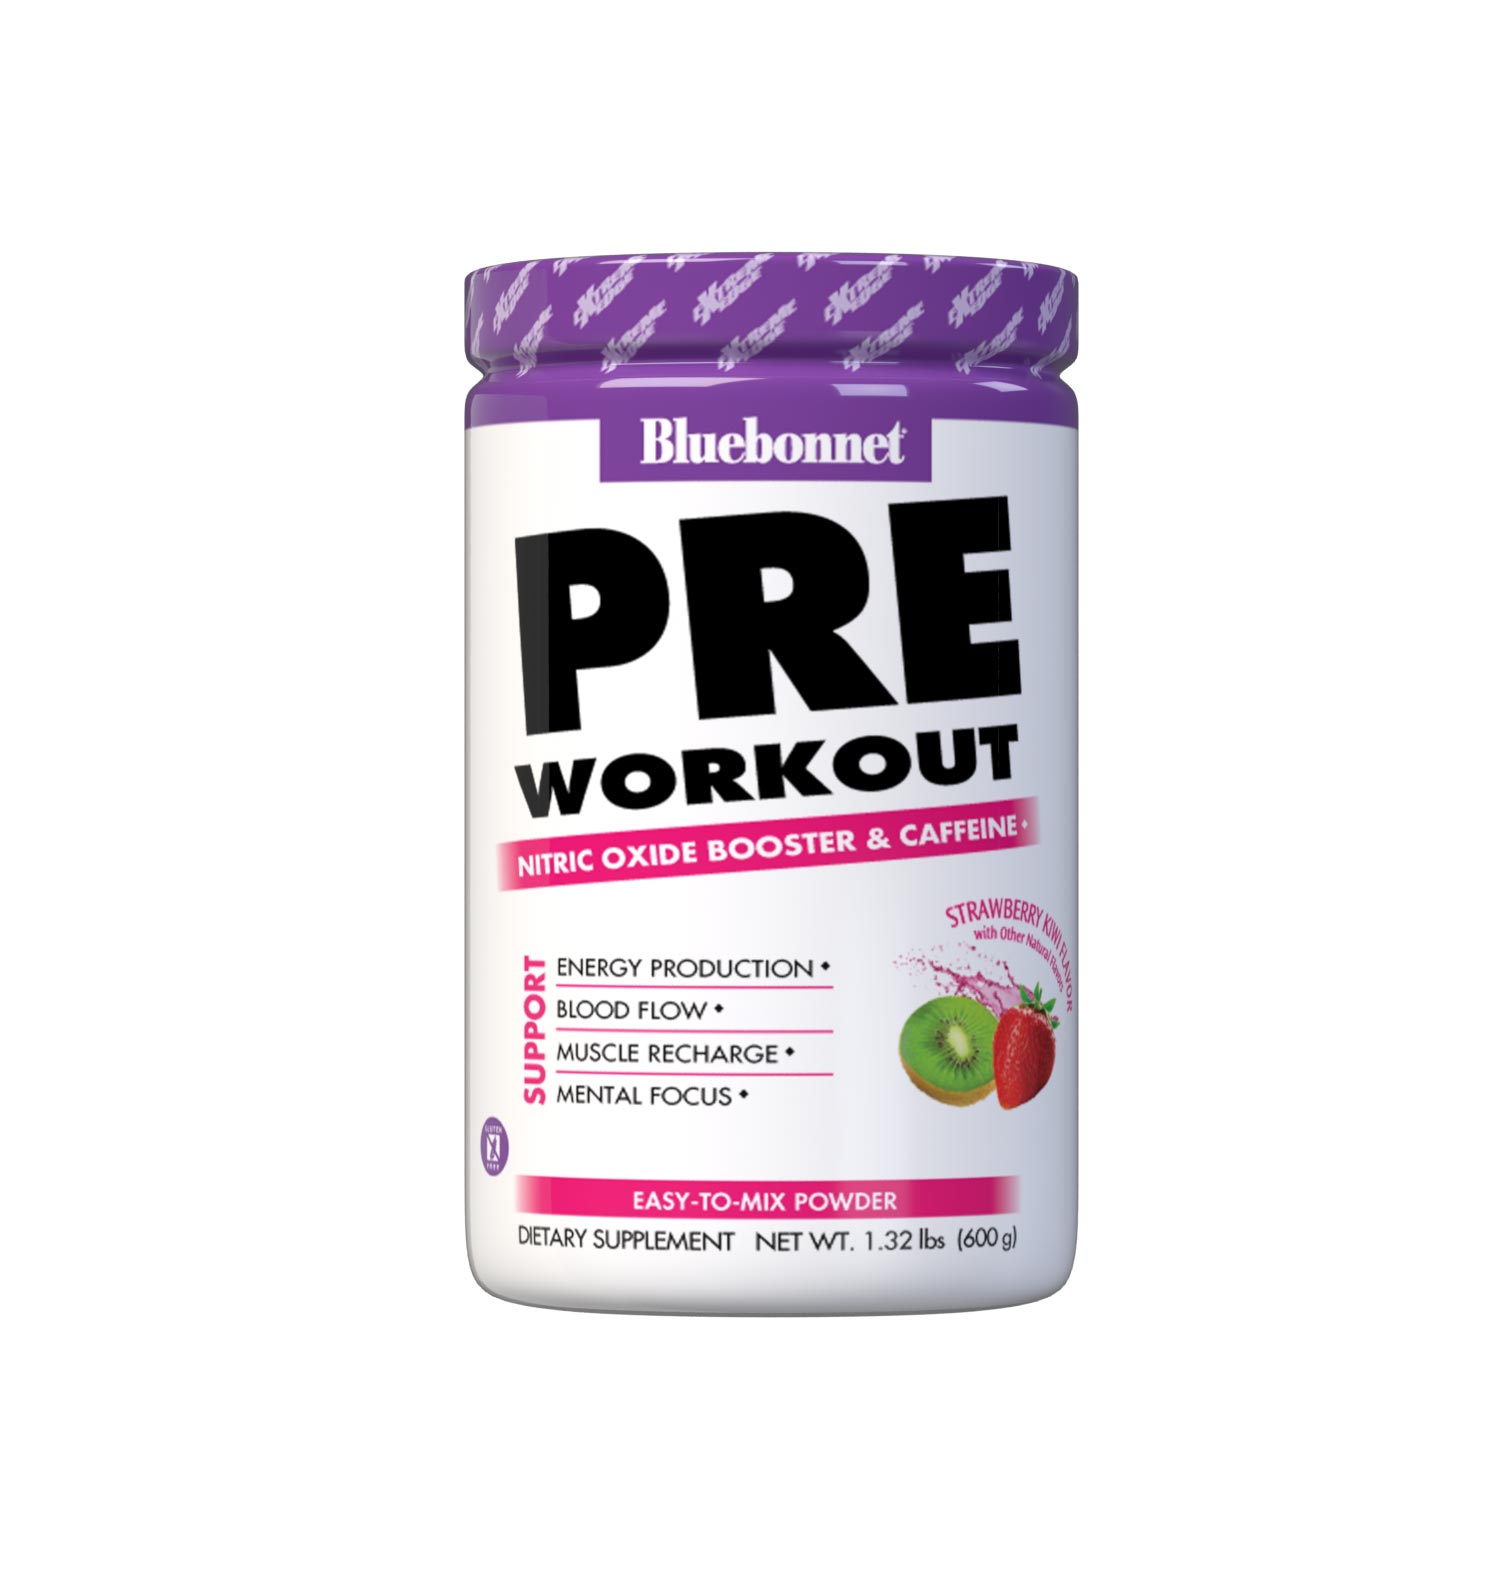 Bluebonnet's Strawberry Kiwi Flavored Pre Workout powder is designed to be one of the most comprehensive, muscle recharging formulas ever created. This triple-turbo, super-charged formula generates high energy, sharpens mental concentration, and increases nitric oxide (NO) levels for greater blood flow and intense muscle pumps. #size_1.32 lb